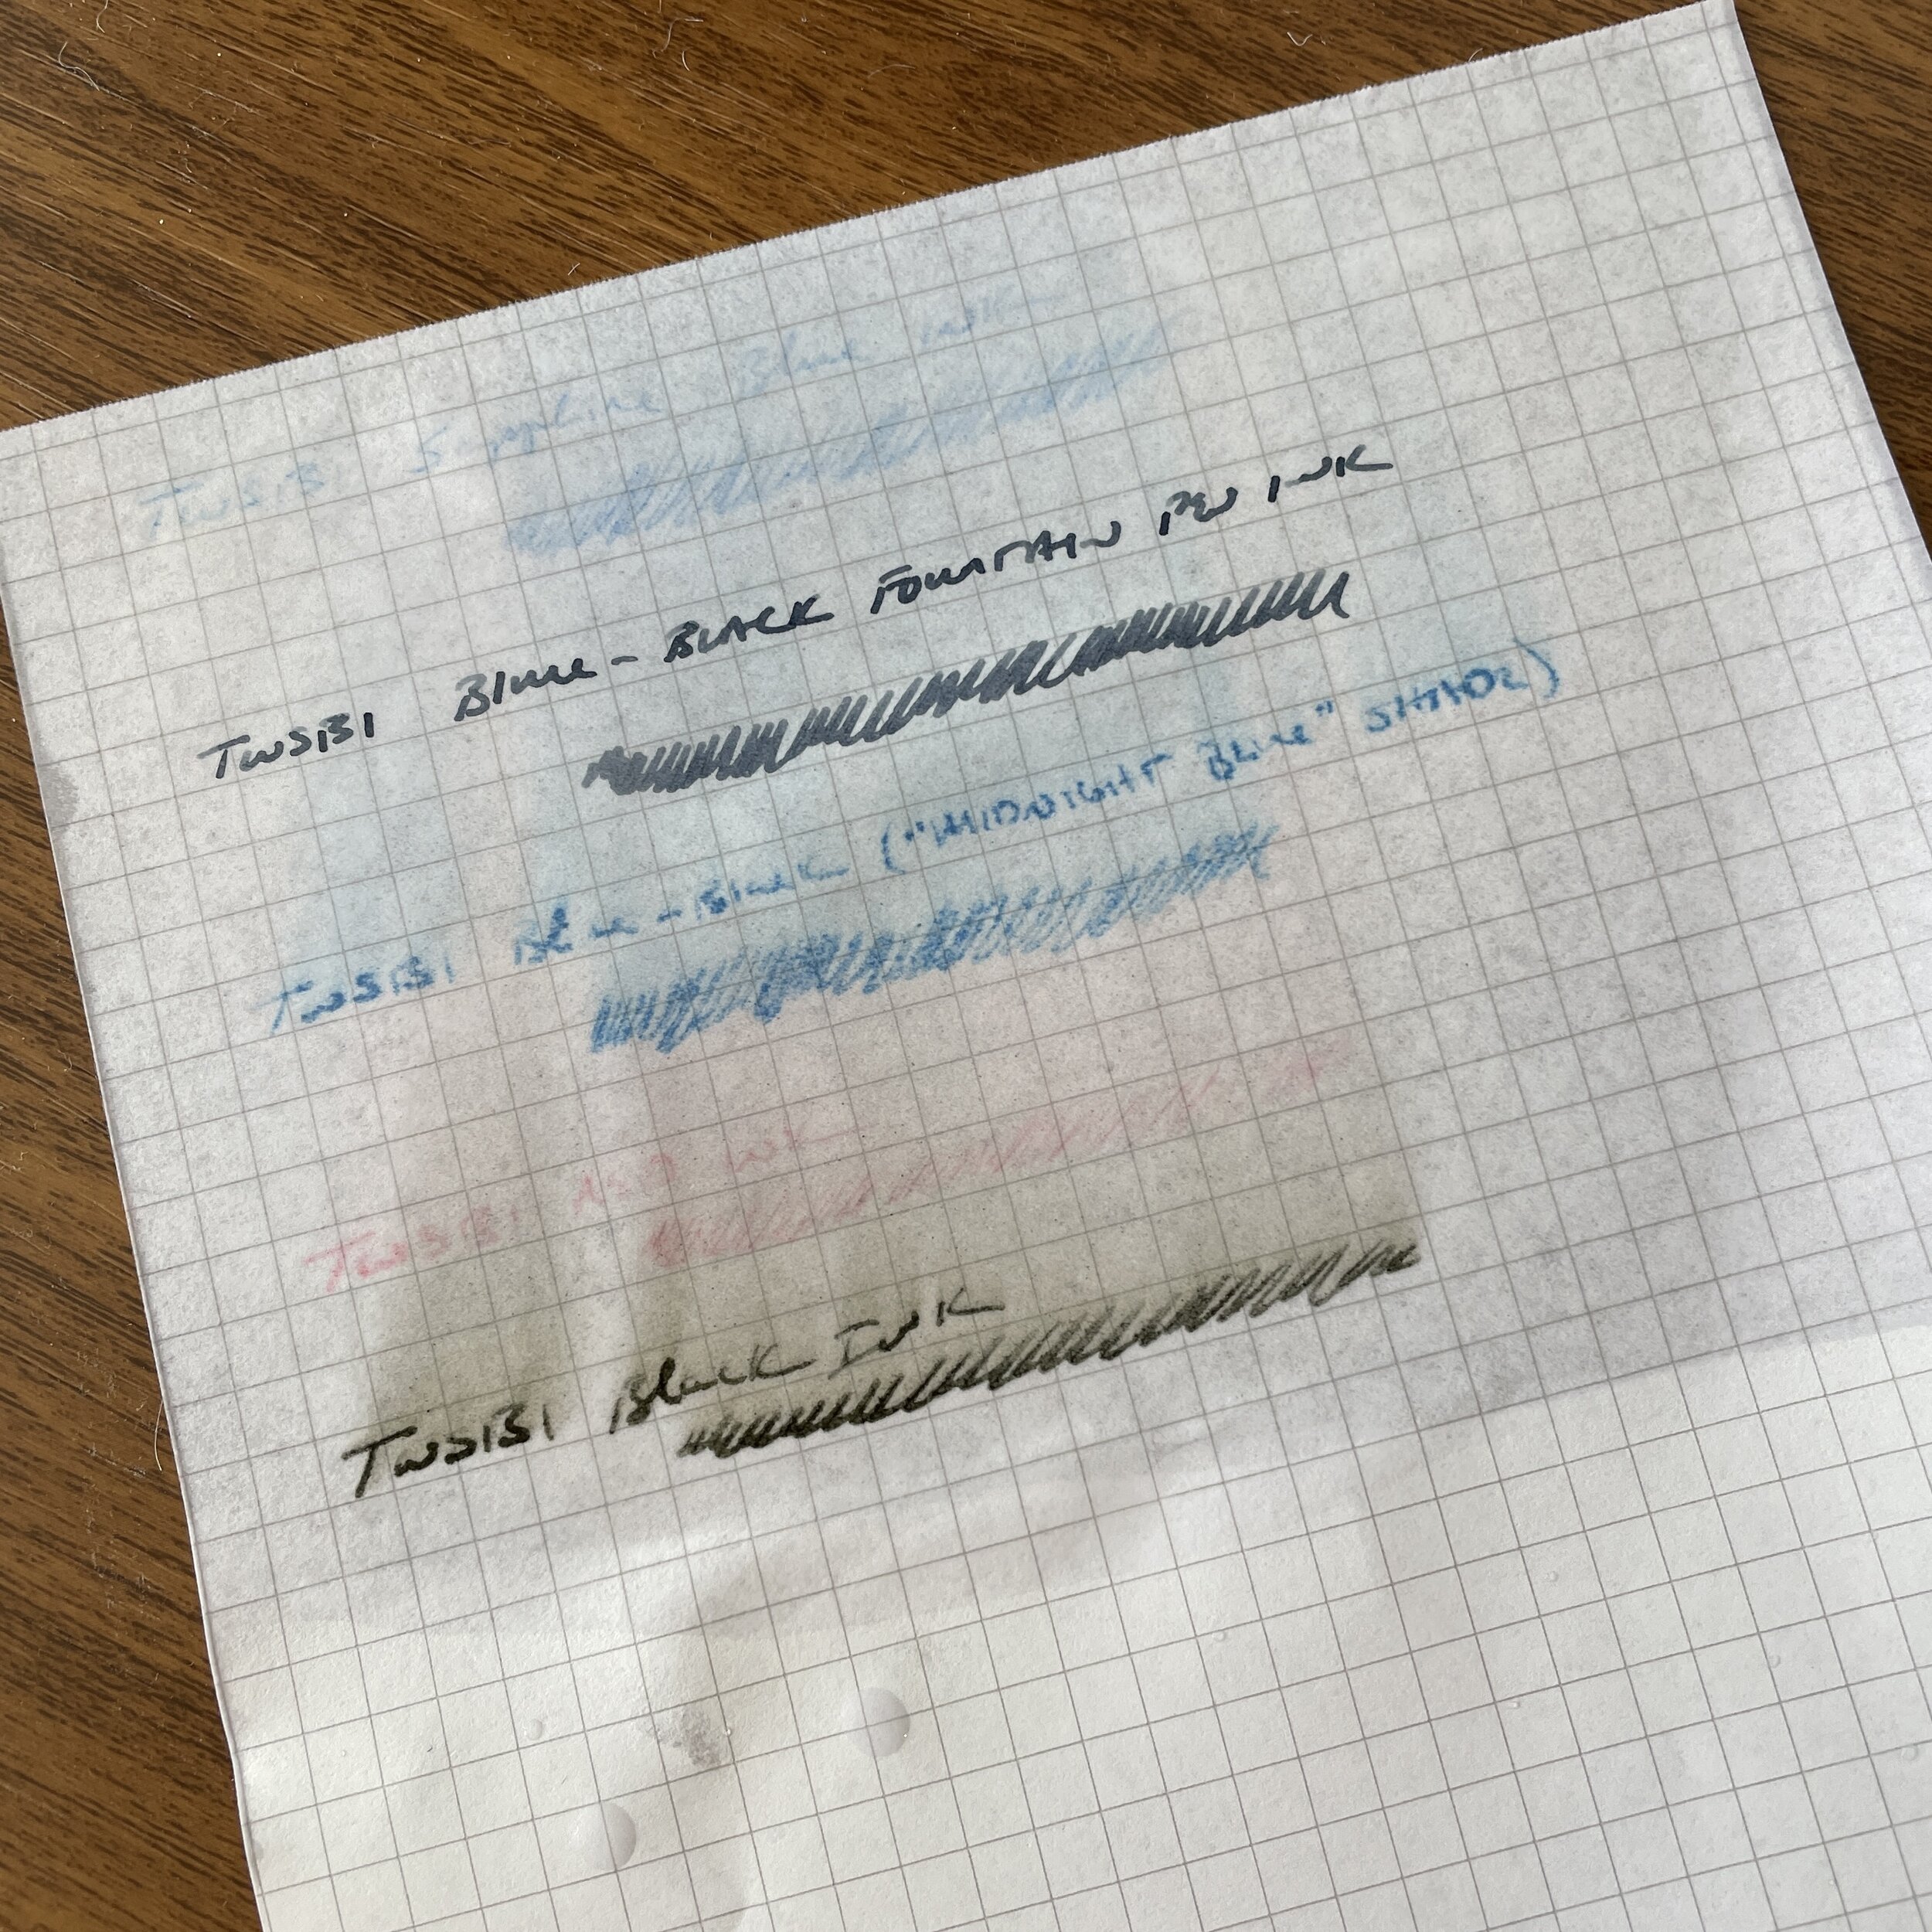 Back to Basics: Blue Ink for Everday Writing — The Gentleman Stationer